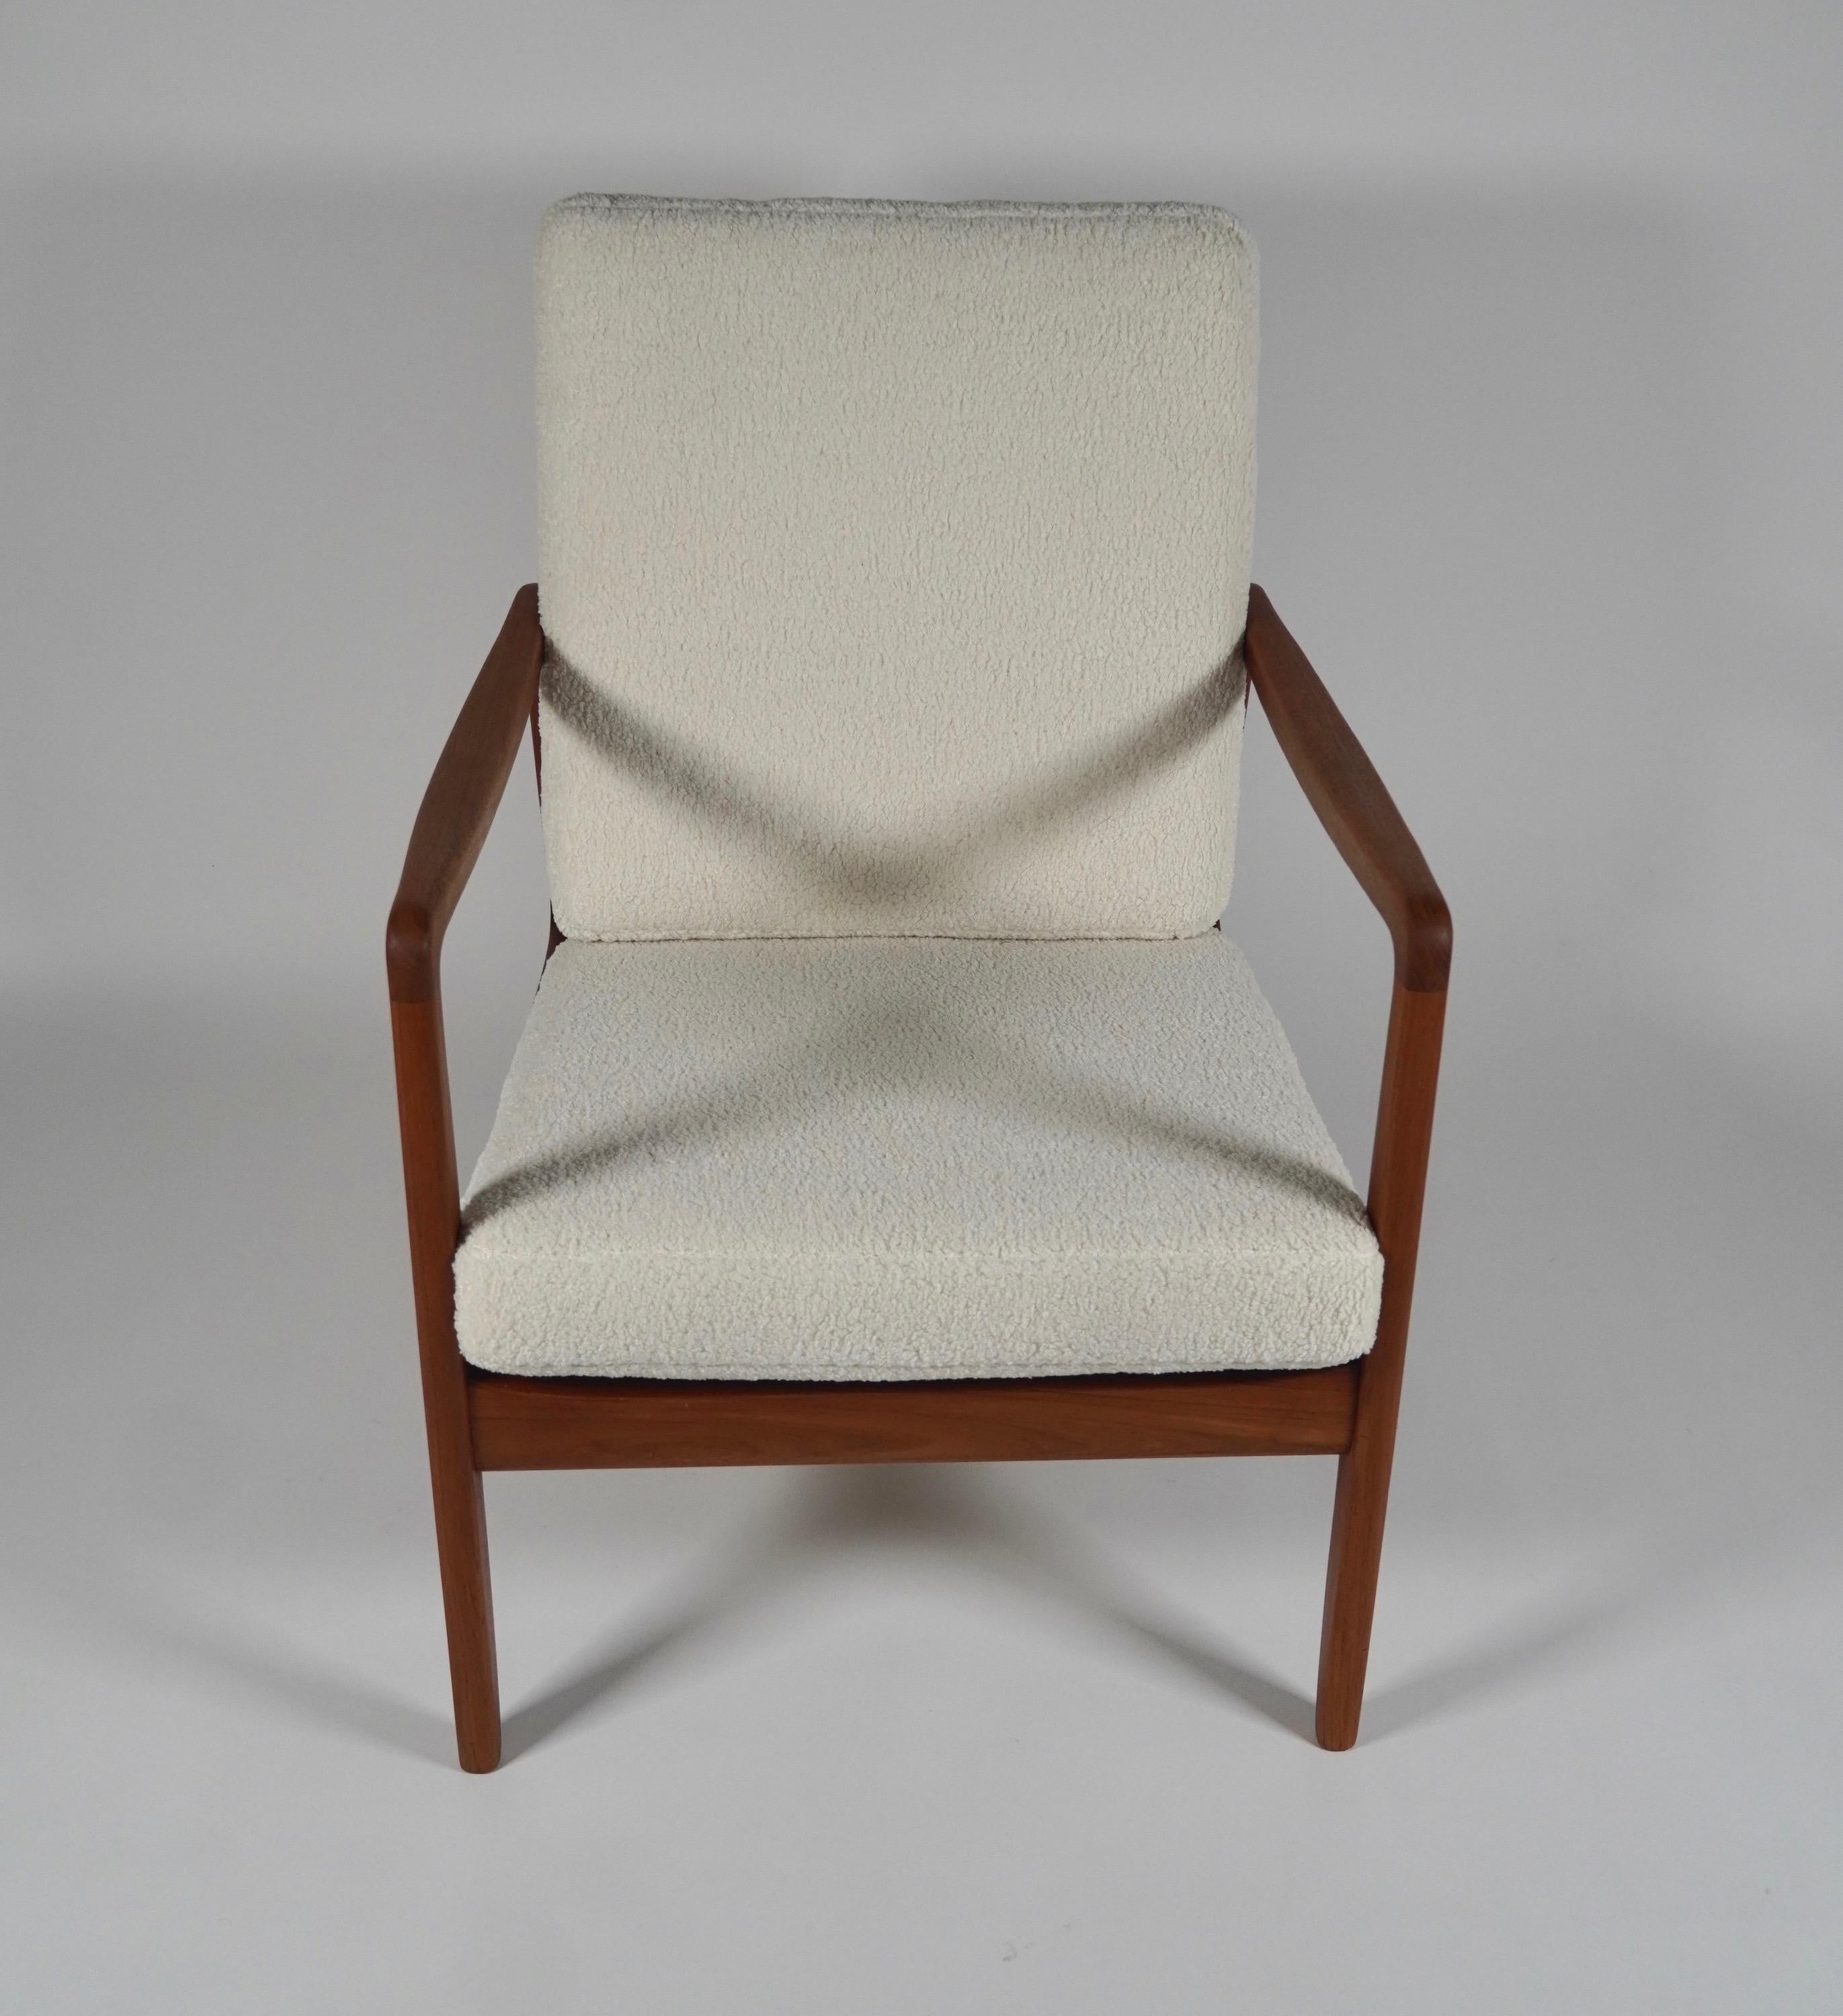 Hand-Crafted Ole Wanscher Armchair Imported by John Stuart Inc. W/ Knoll Fabric